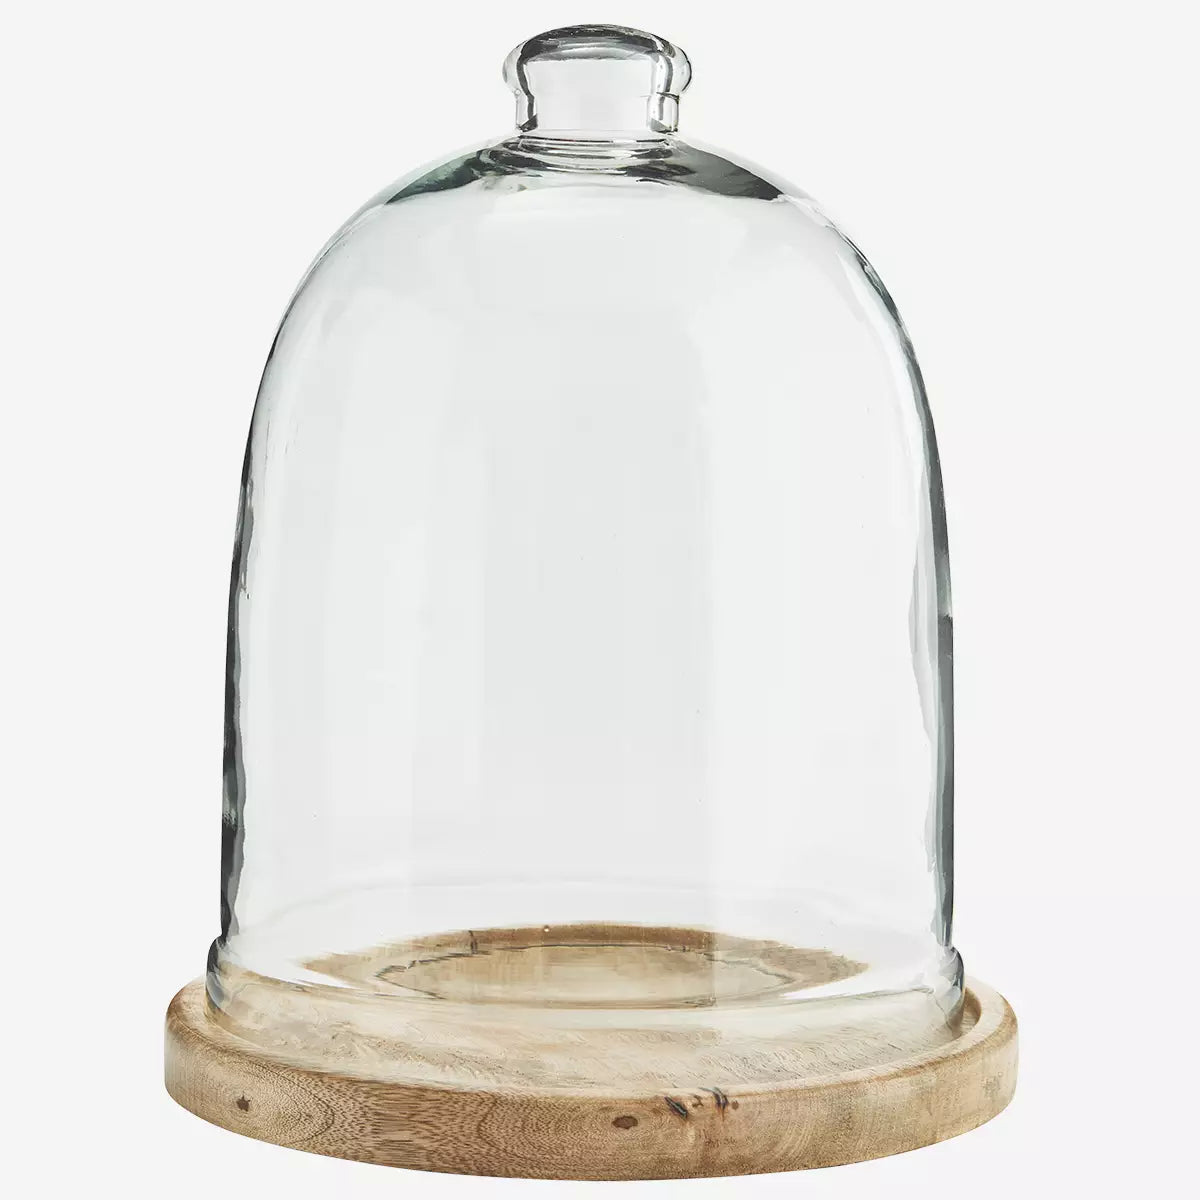 GLASS COVER WITH WOODEN BASE, MADAM STOLTZ